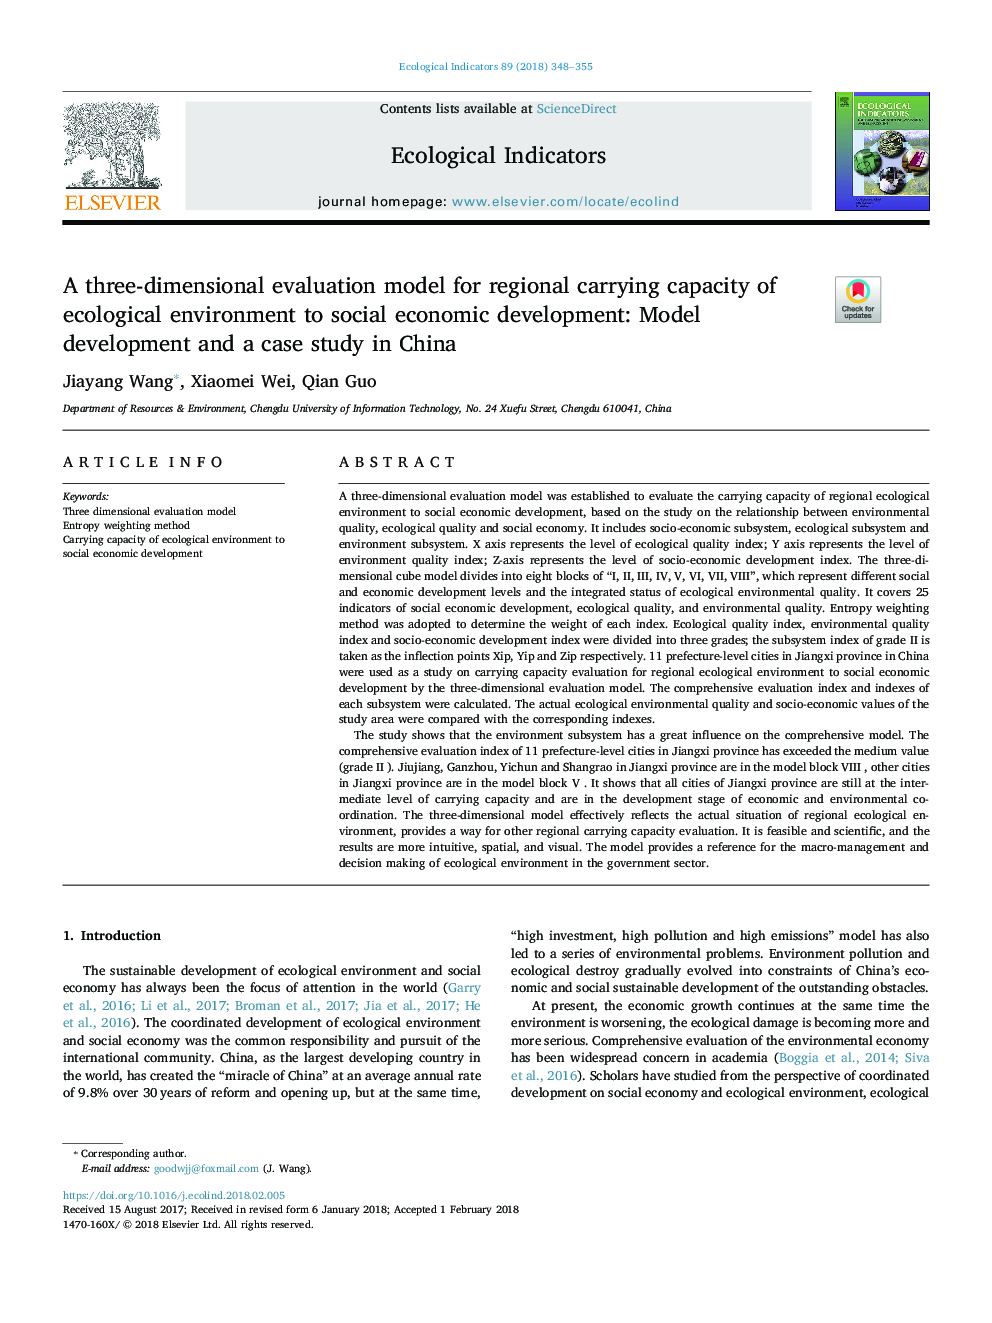 A three-dimensional evaluation model for regional carrying capacity of ecological environment to social economic development: Model development and a case study in China